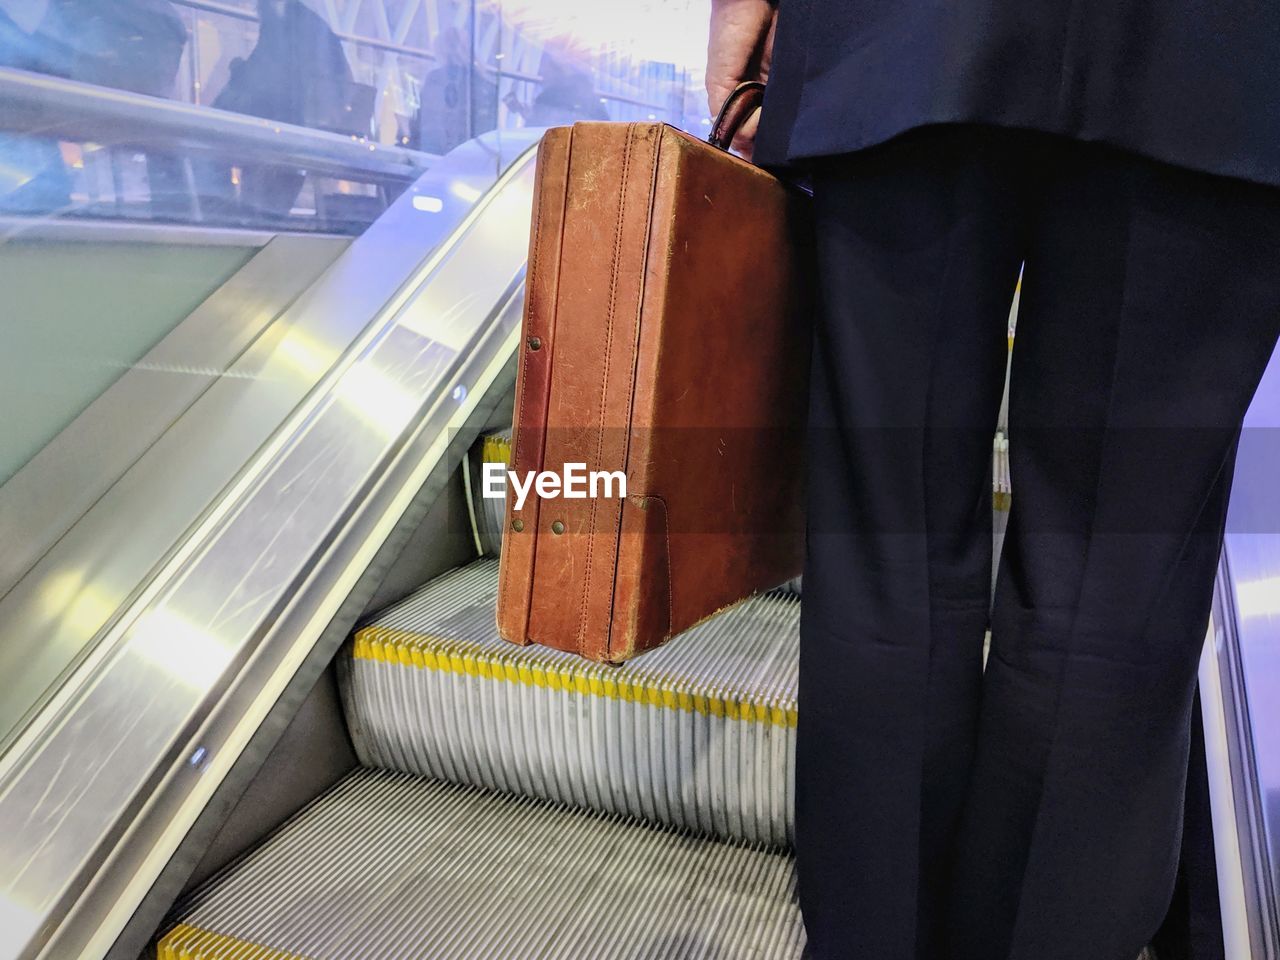 Midsection of businessman holding suitcase while standing on escalator